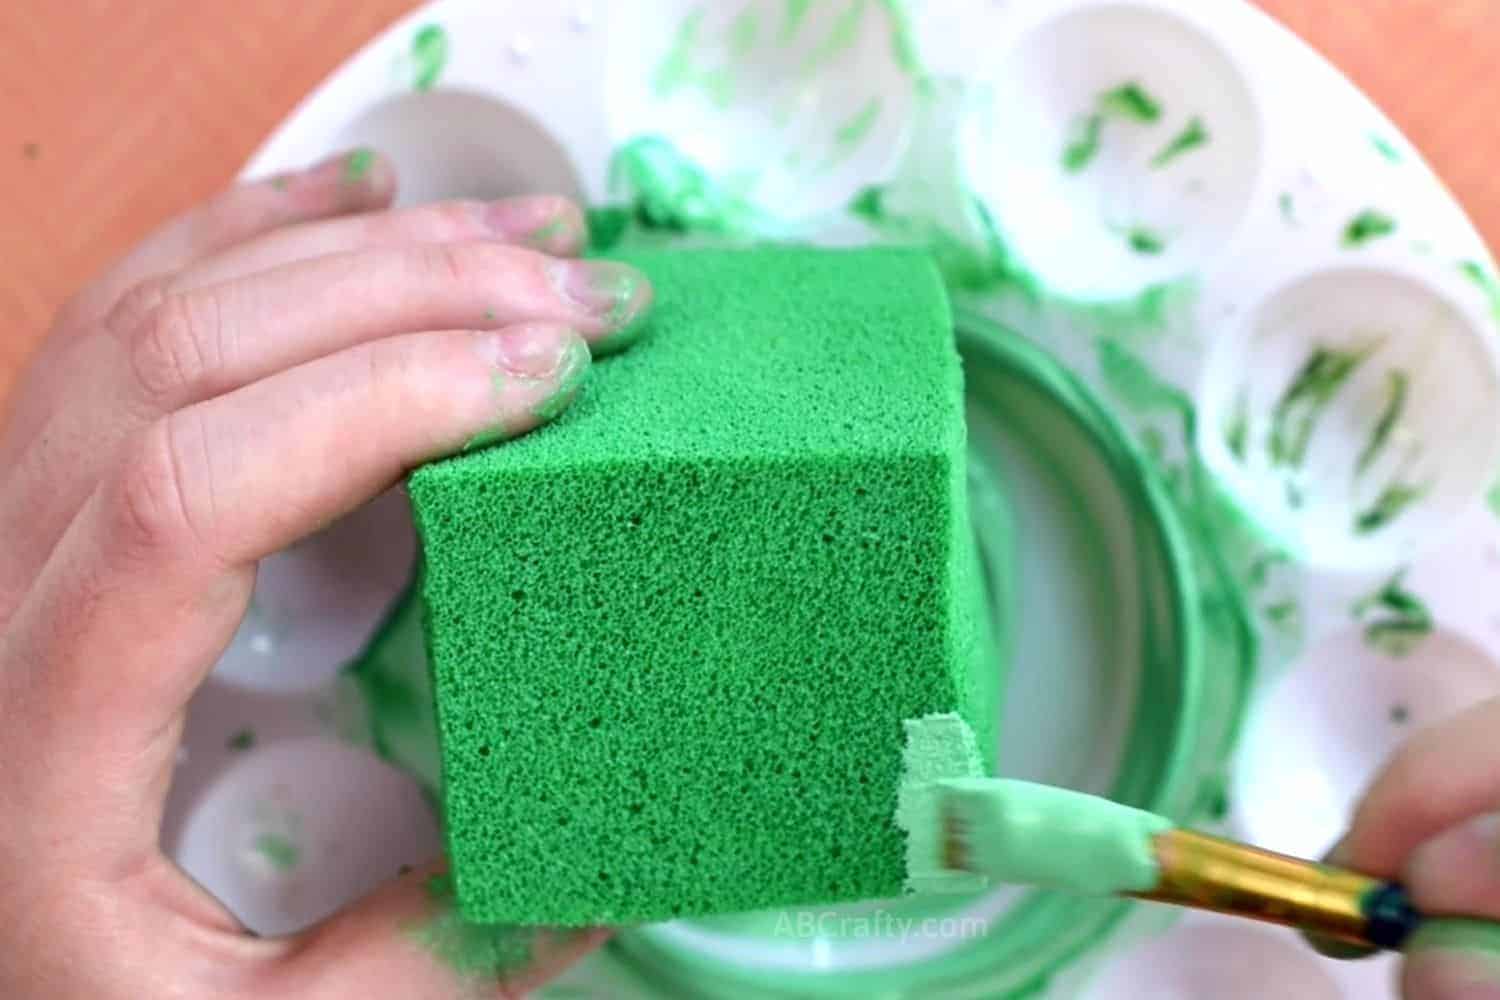 Using a paintbrush to paint light green fabric paint onto the edge of a green-painted foam block